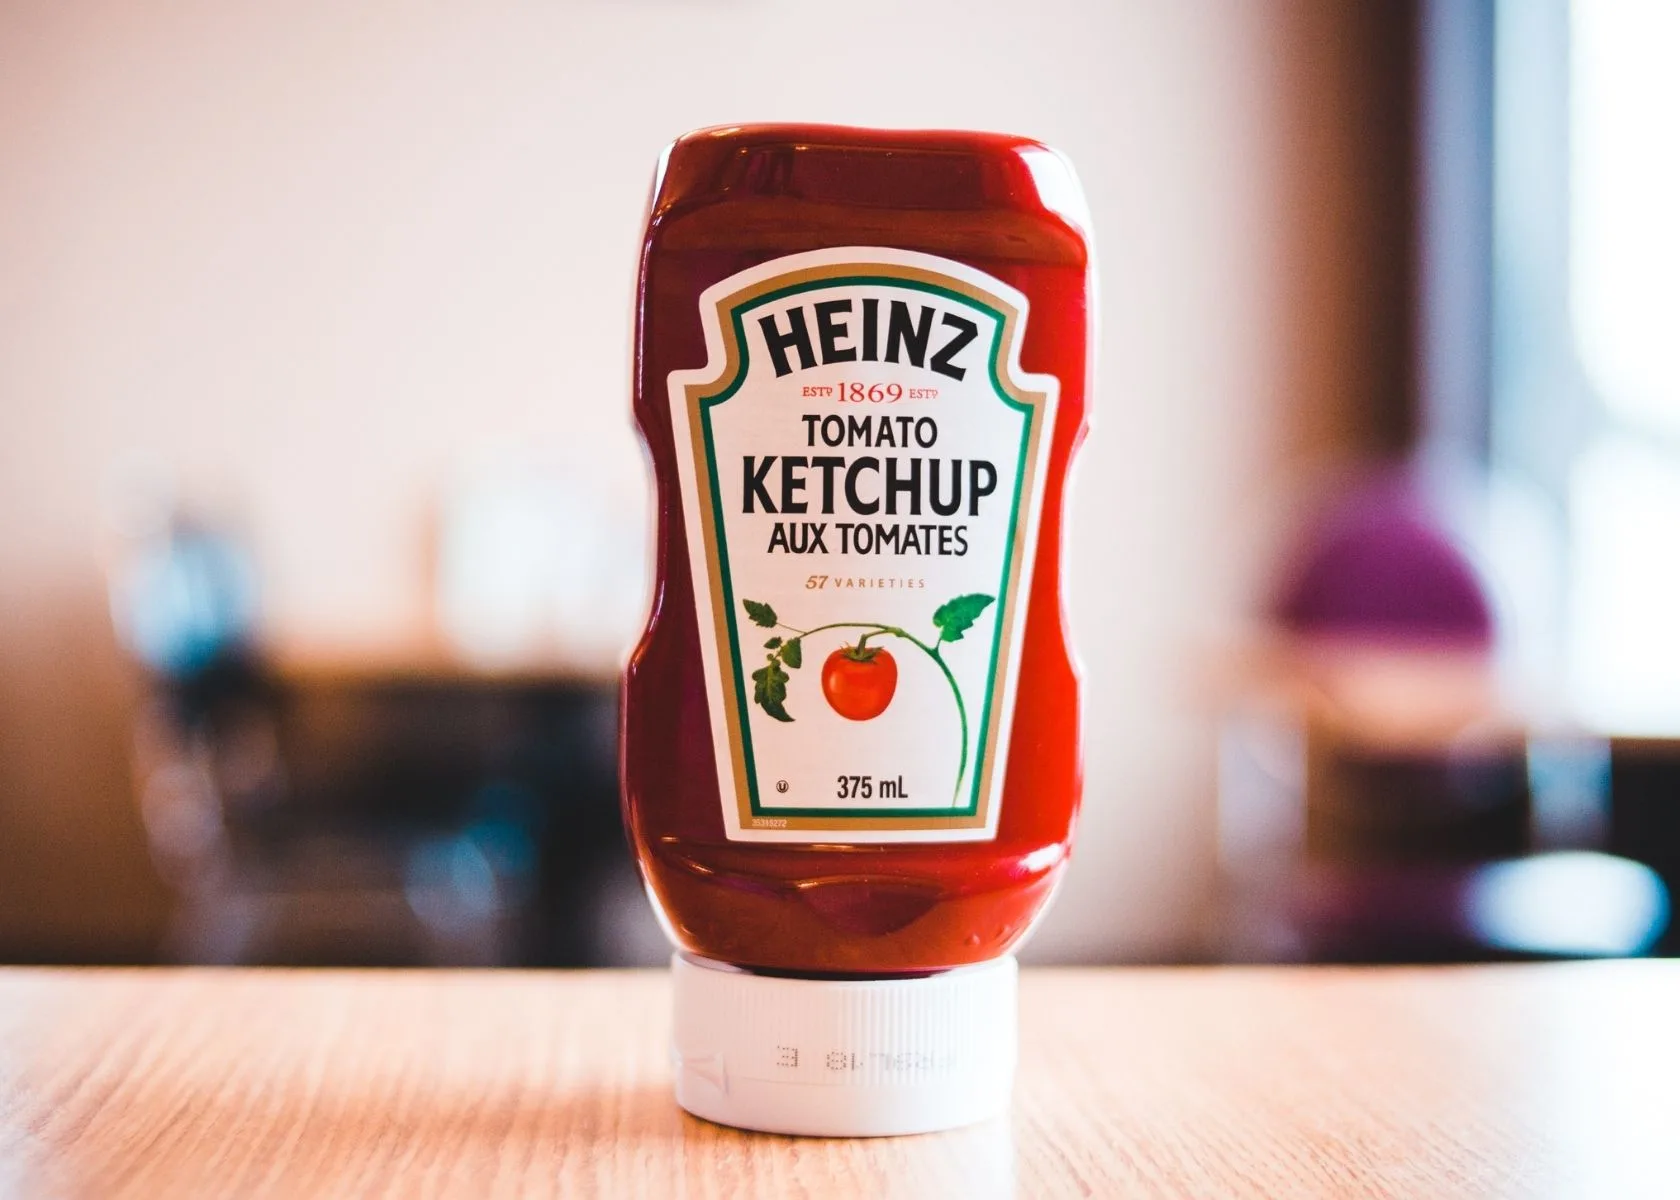 Large Heinz Ketchup bottle standing upside down on a table in restaurant.